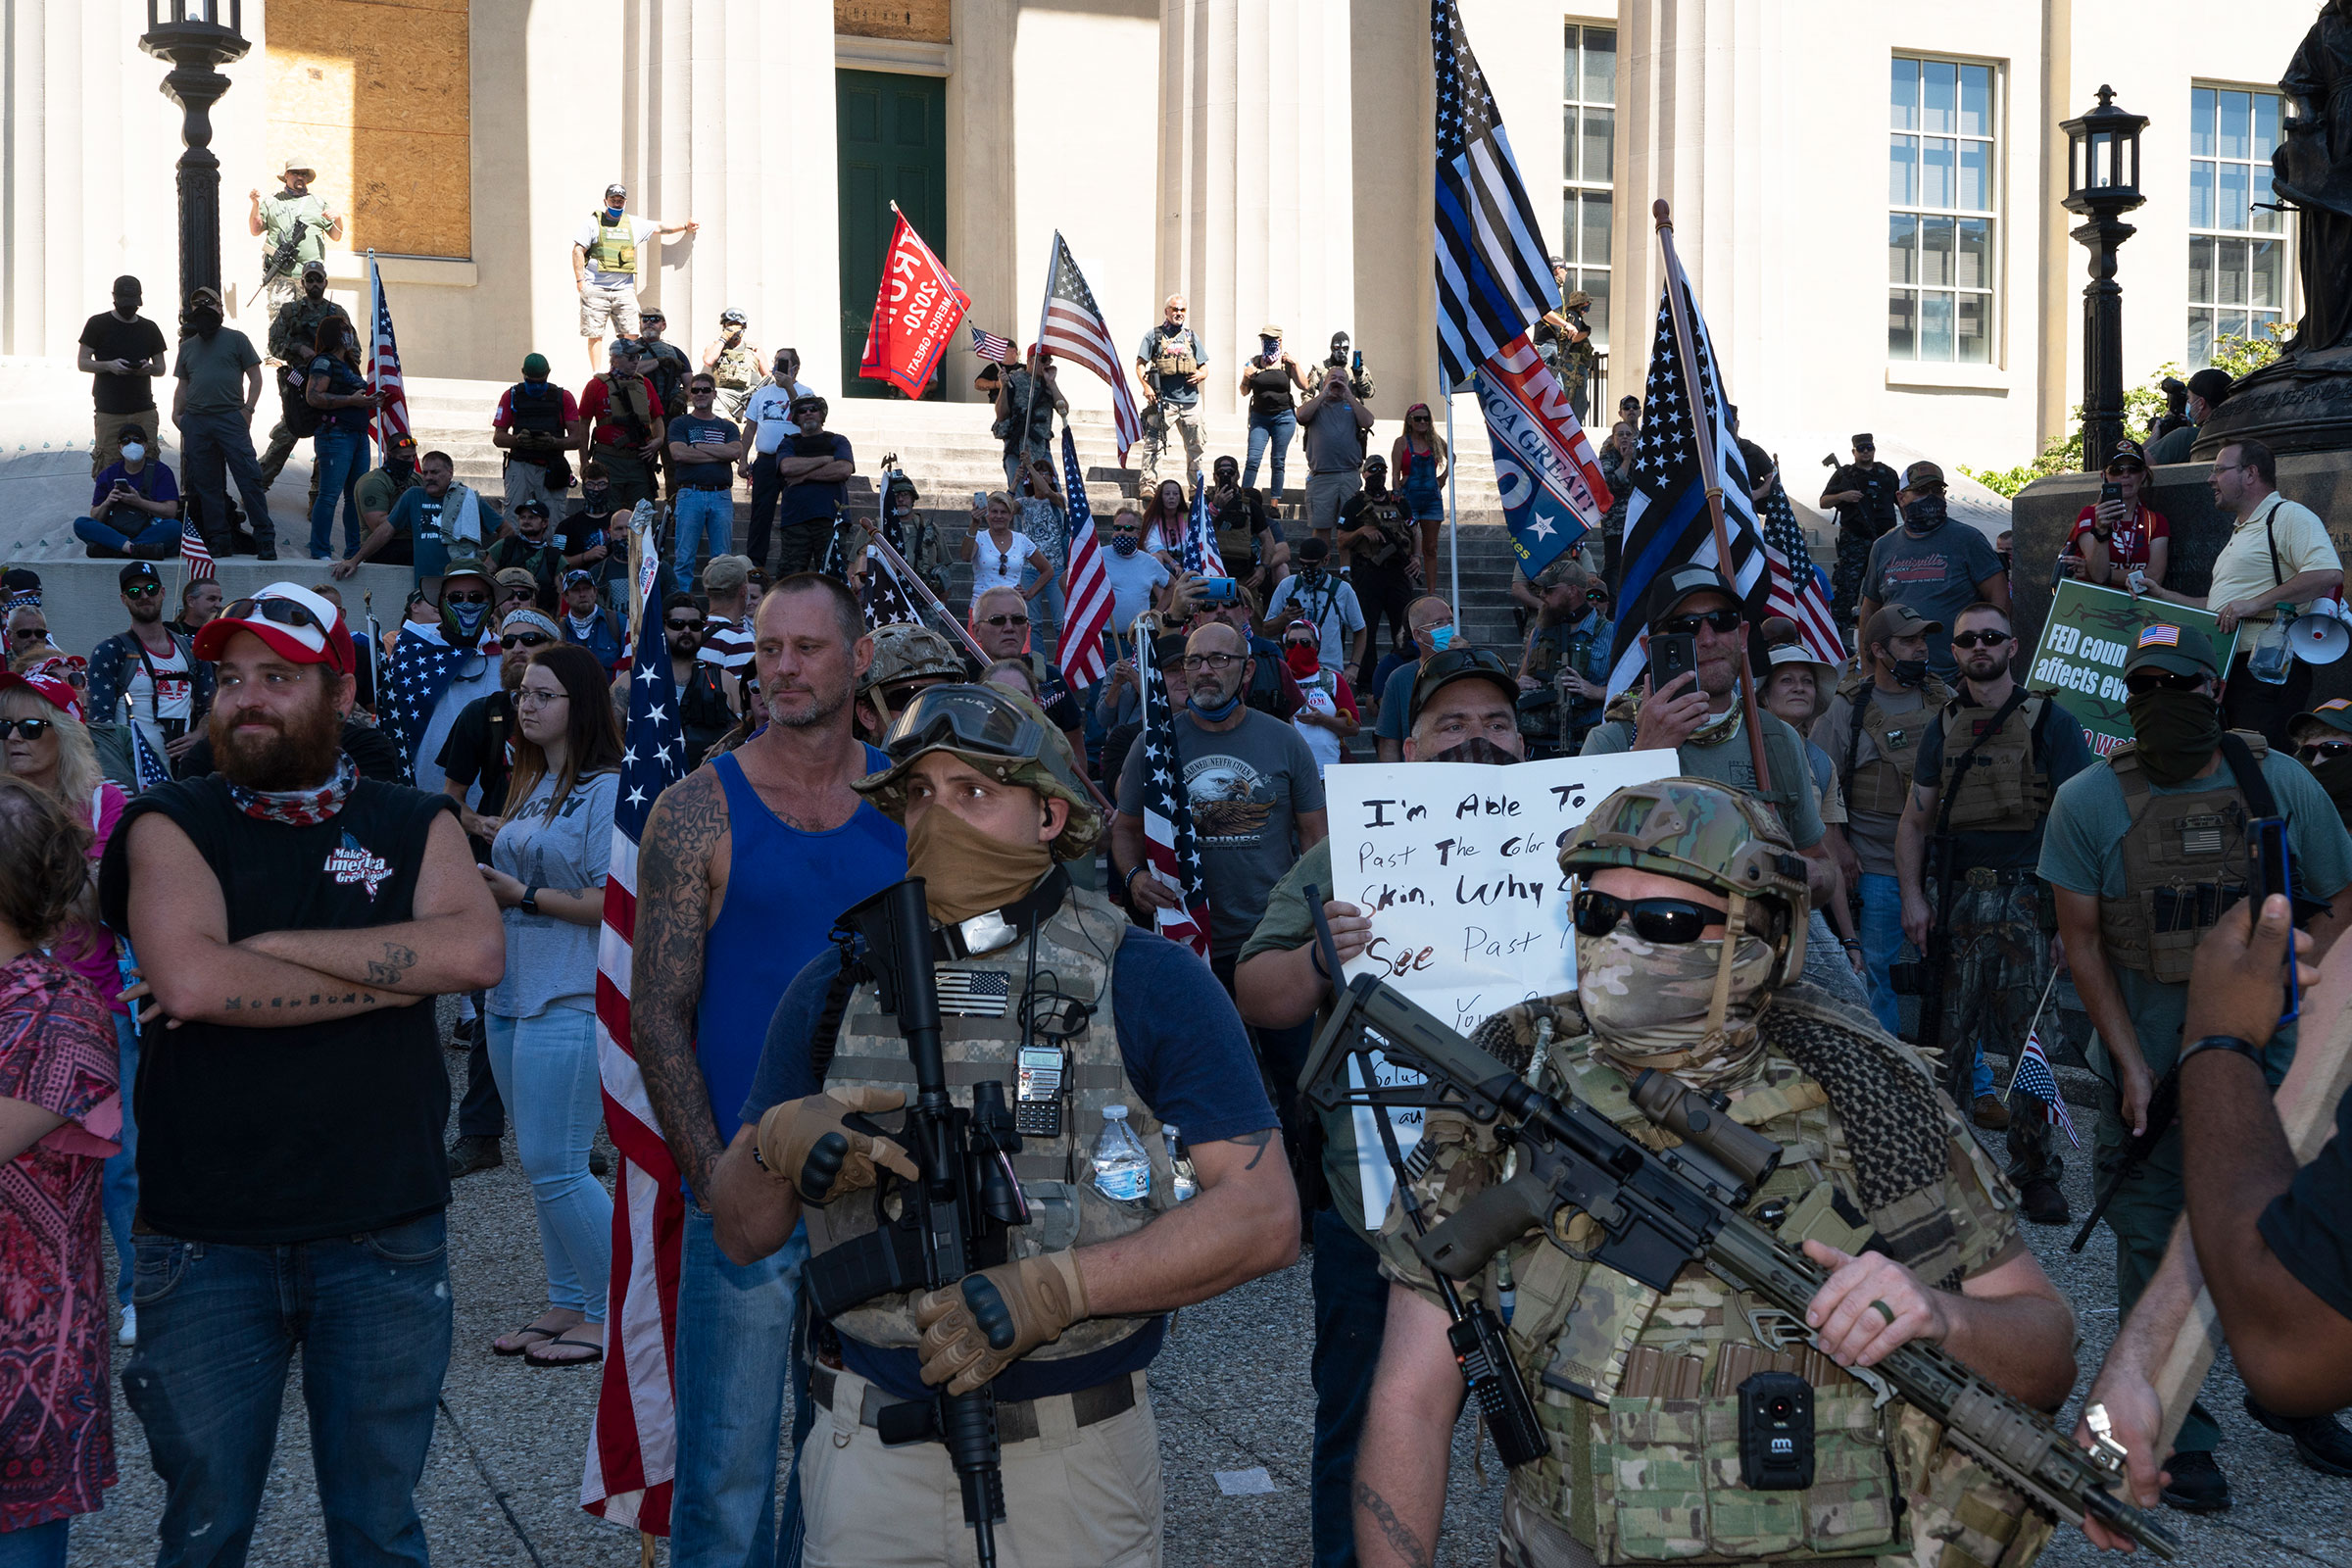 A right-wing group gathers at Jefferson Square, the site of the Breonna Taylor memorial Louisville, Ky., on Sept. 5, 2020. (Peter van Agtmael—Magnum Photos for TIME)